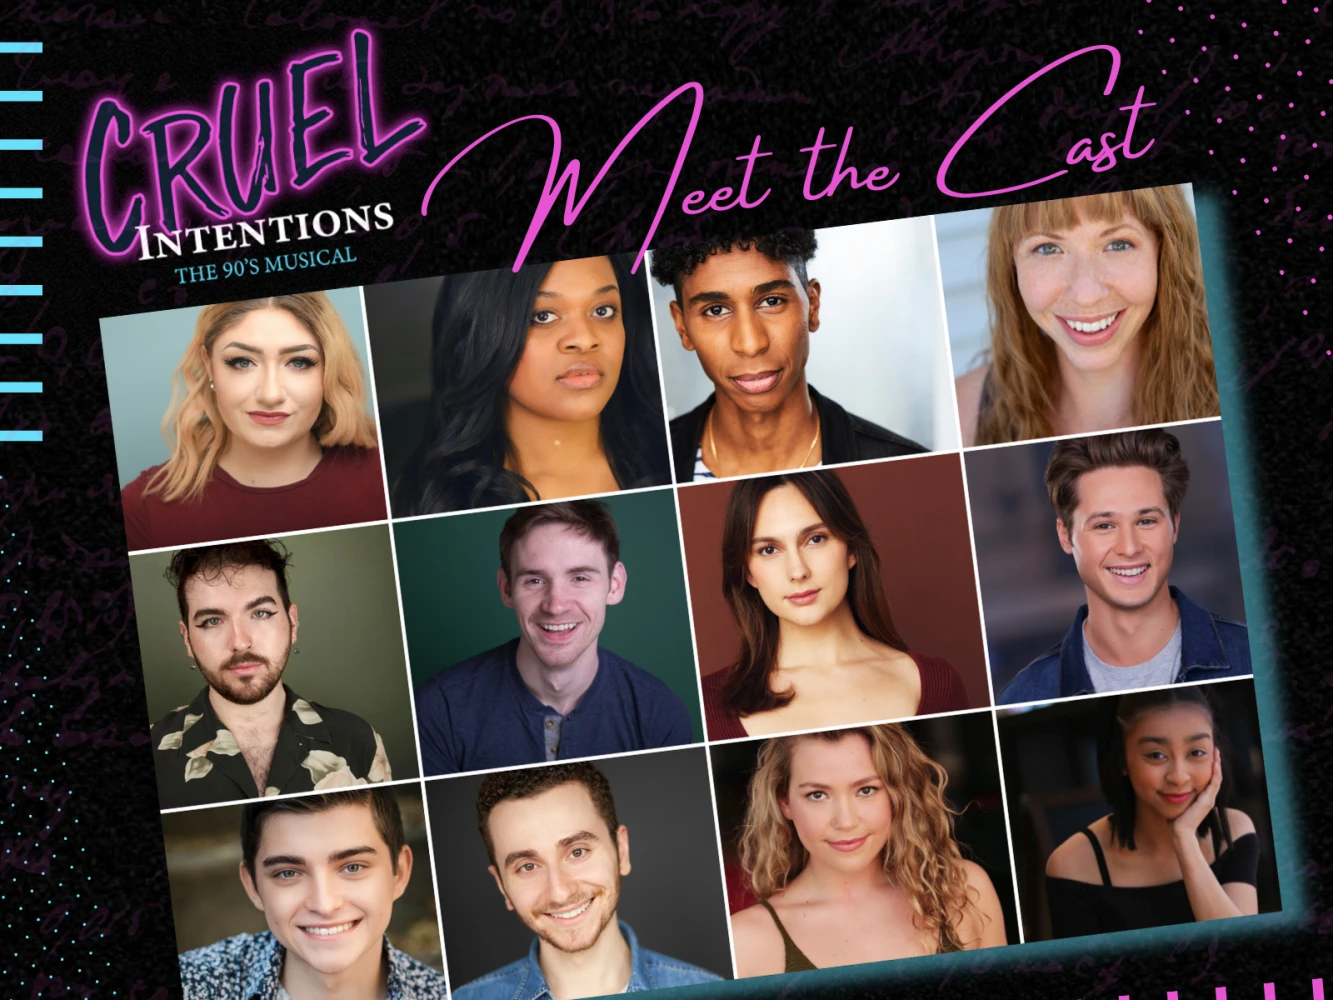 Cruel Intentions: The 90s Musical: What to expect - 4